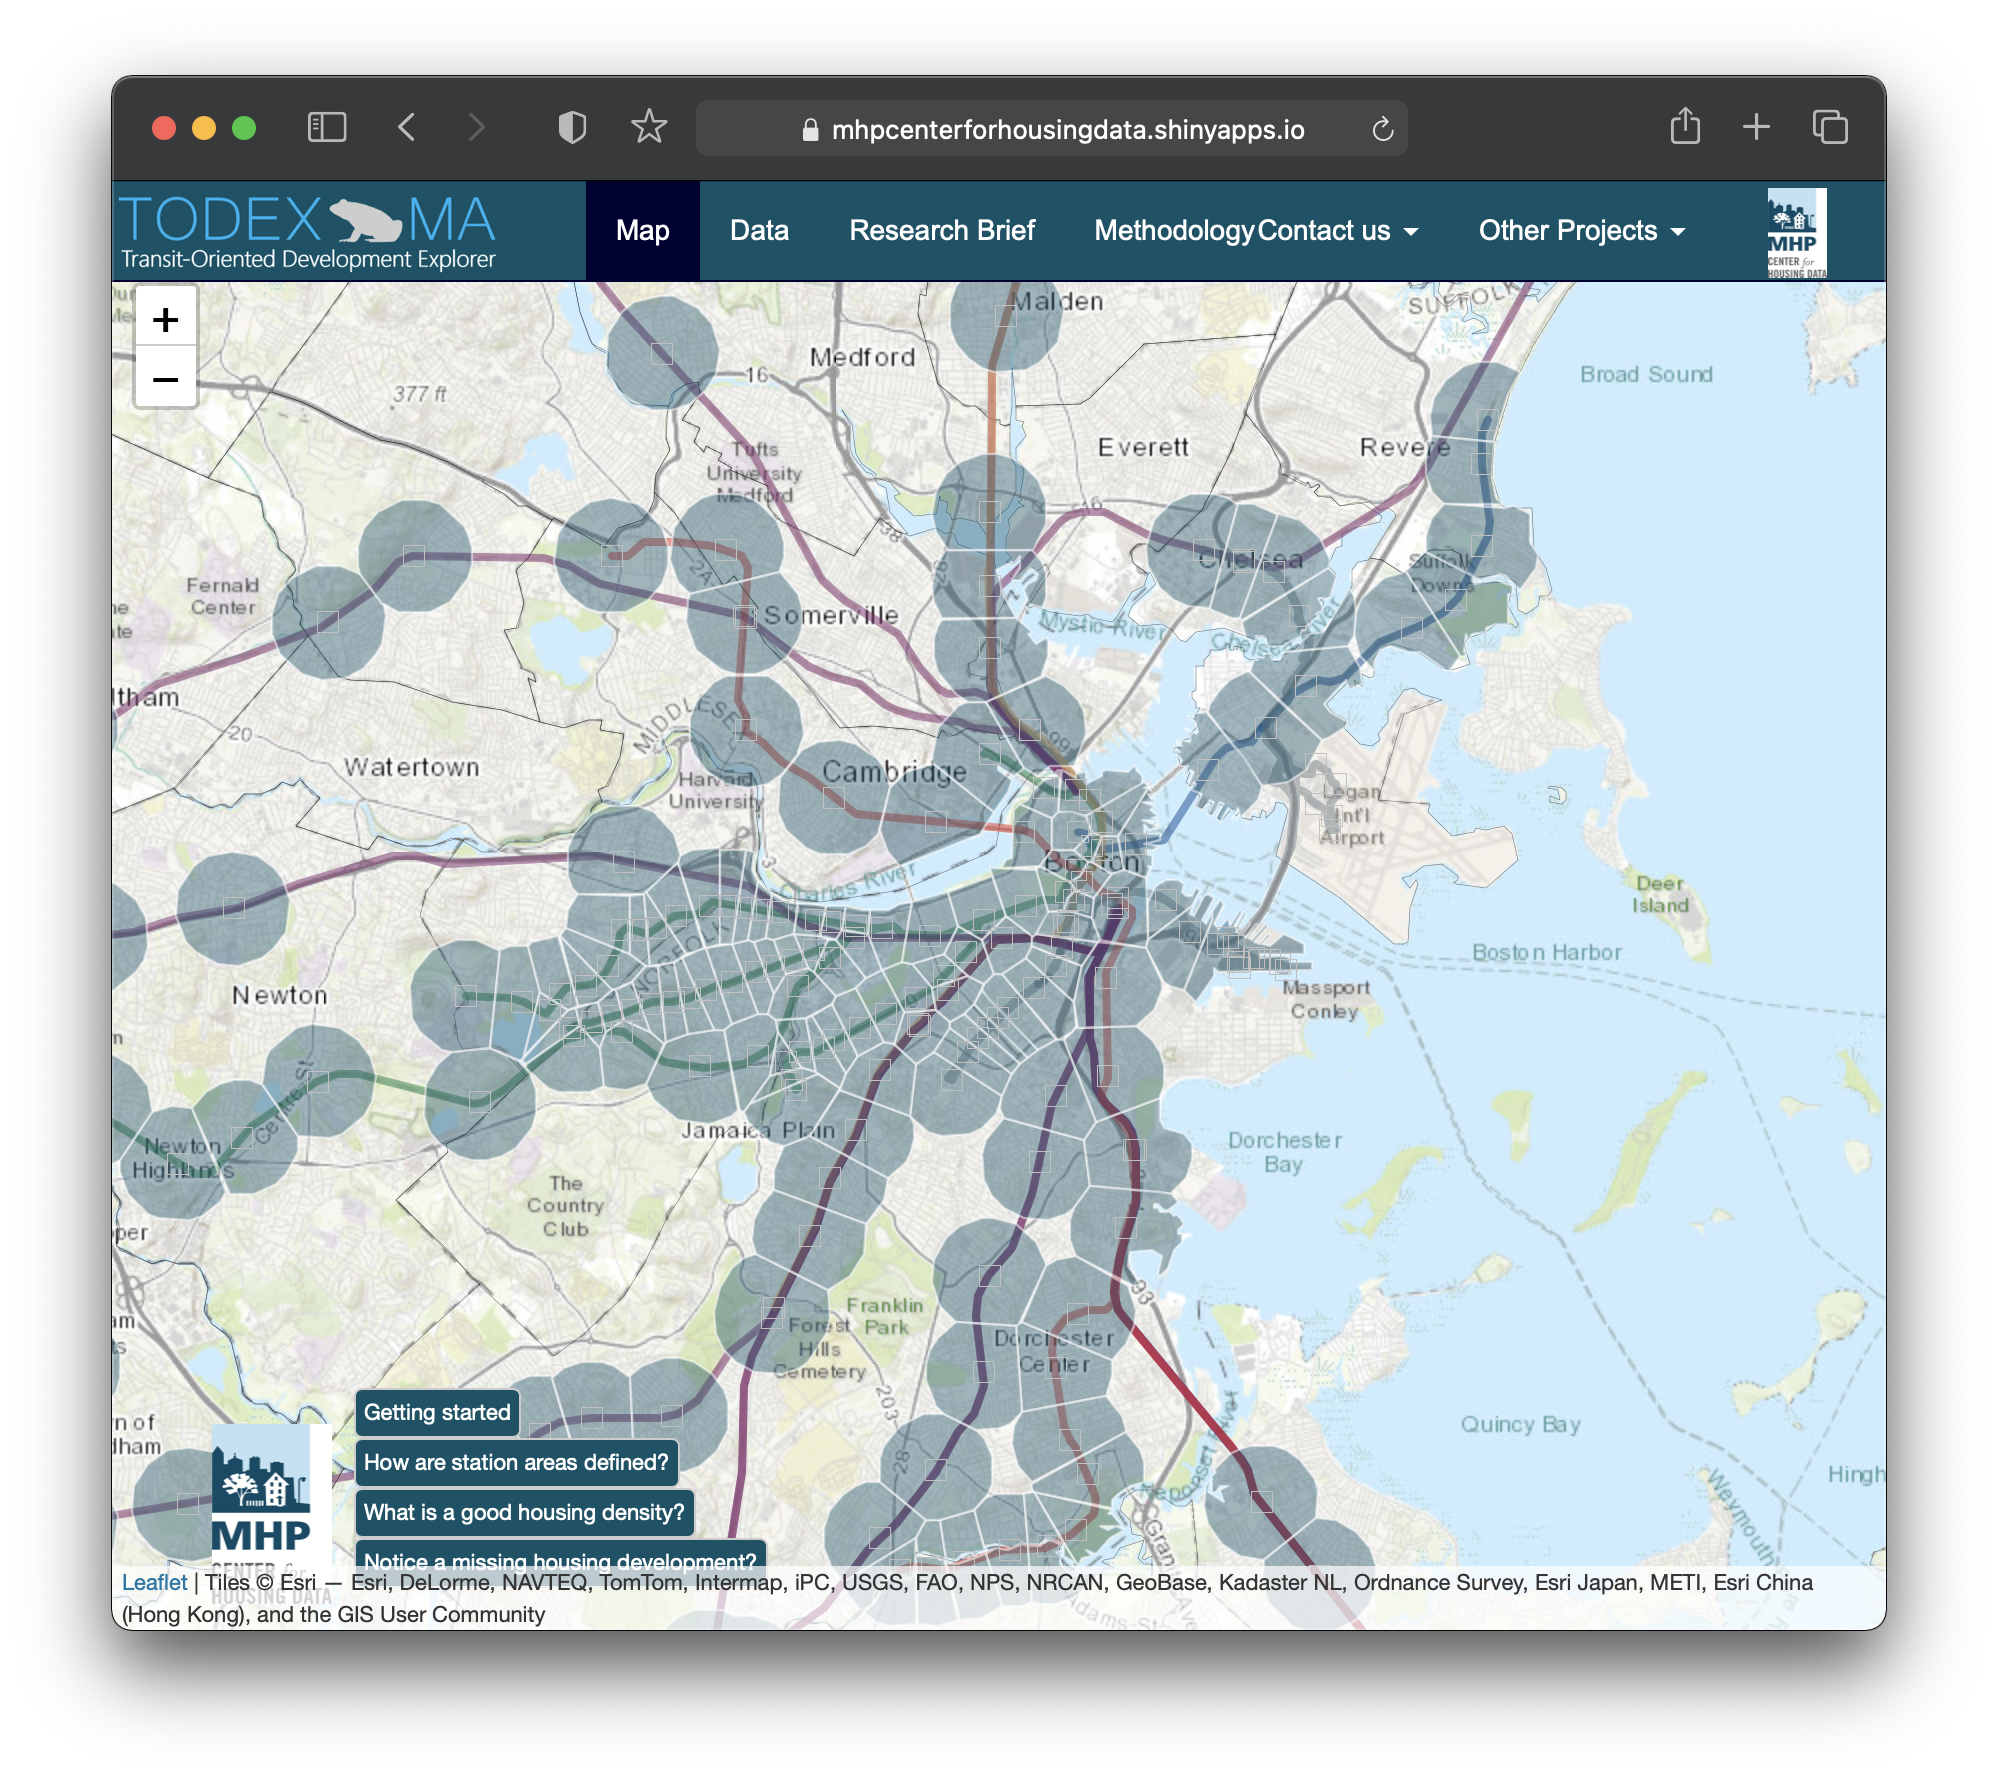 The TODEX map allows you to explore residential density along MBTA transit lines.